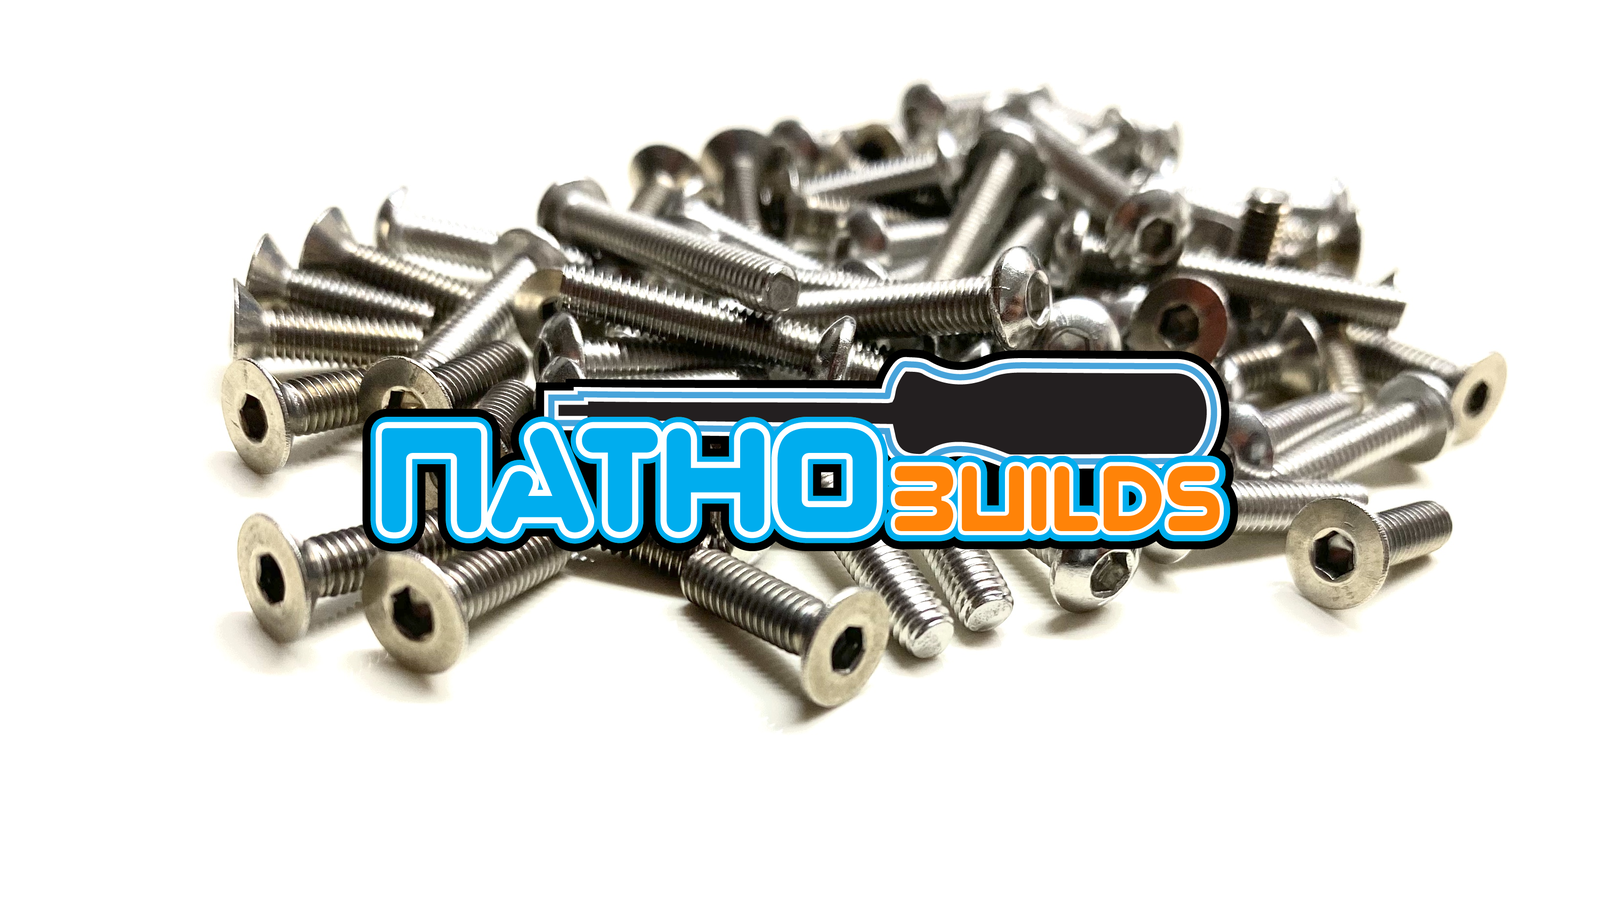 NathoBuilds: Stainless Steel Screw Kits for 1/8th - Team Associated RC8B3.2